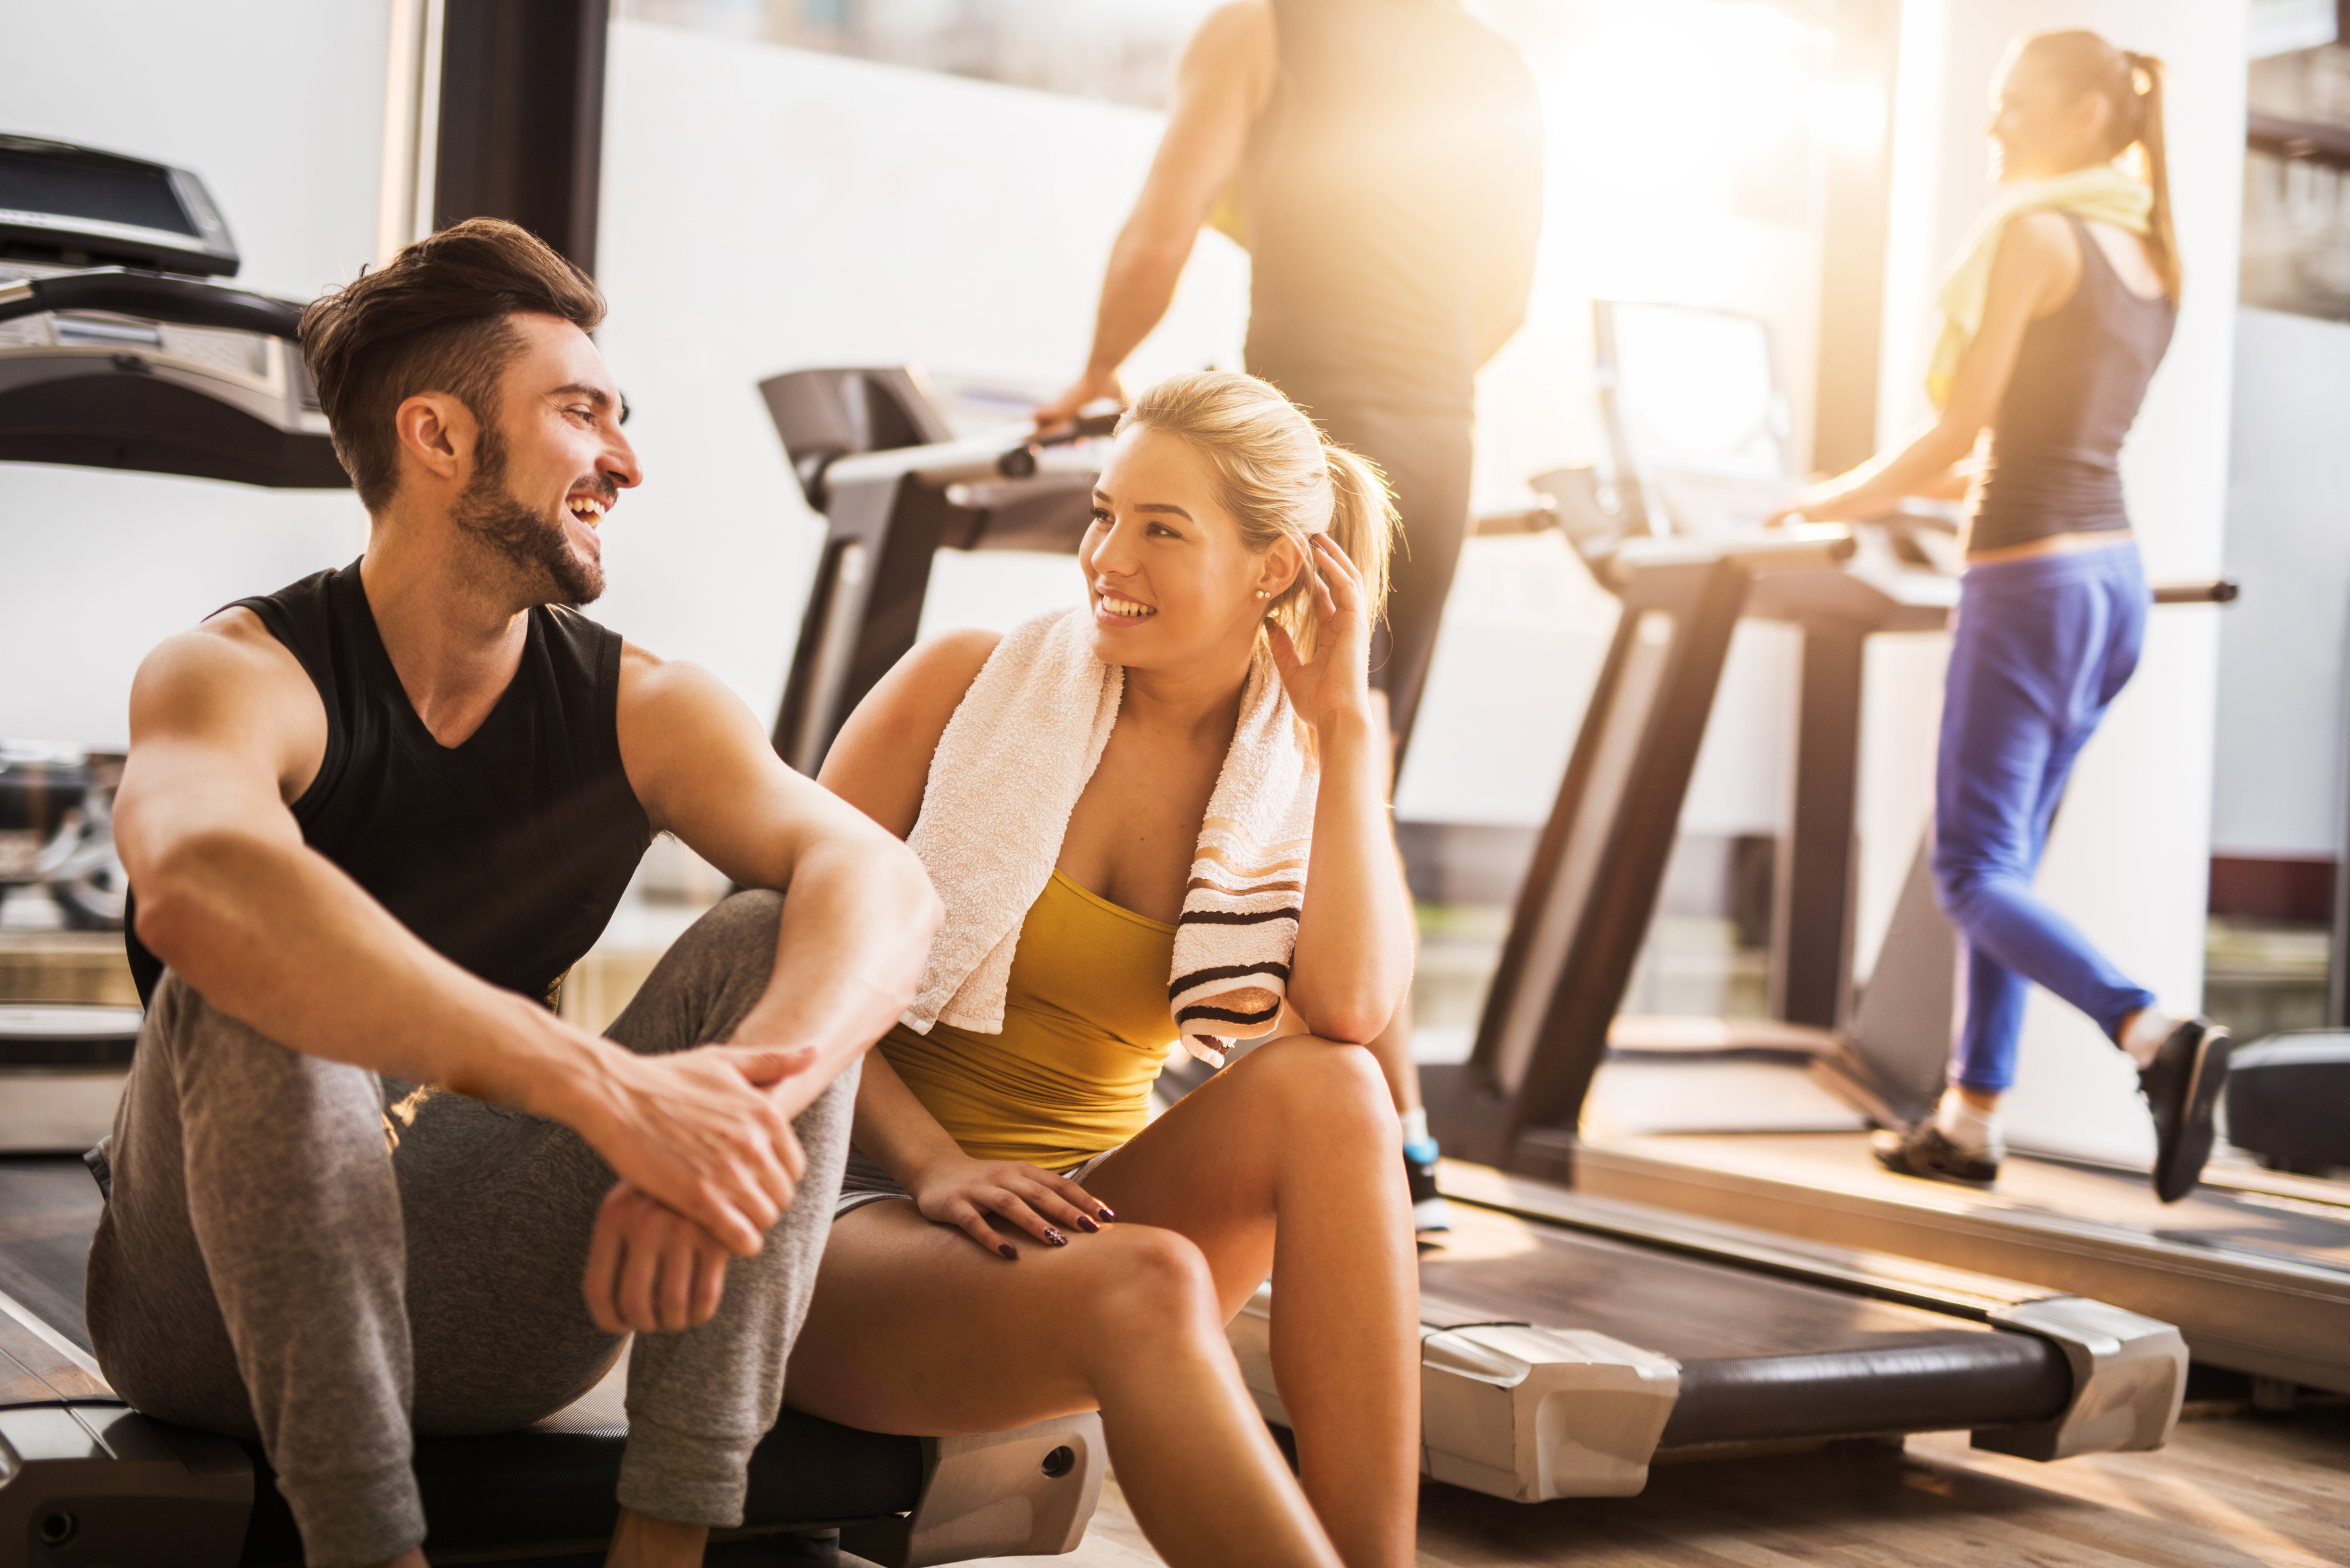 Are Most People That Work Out In Public Gyms Single And Available For Dating?